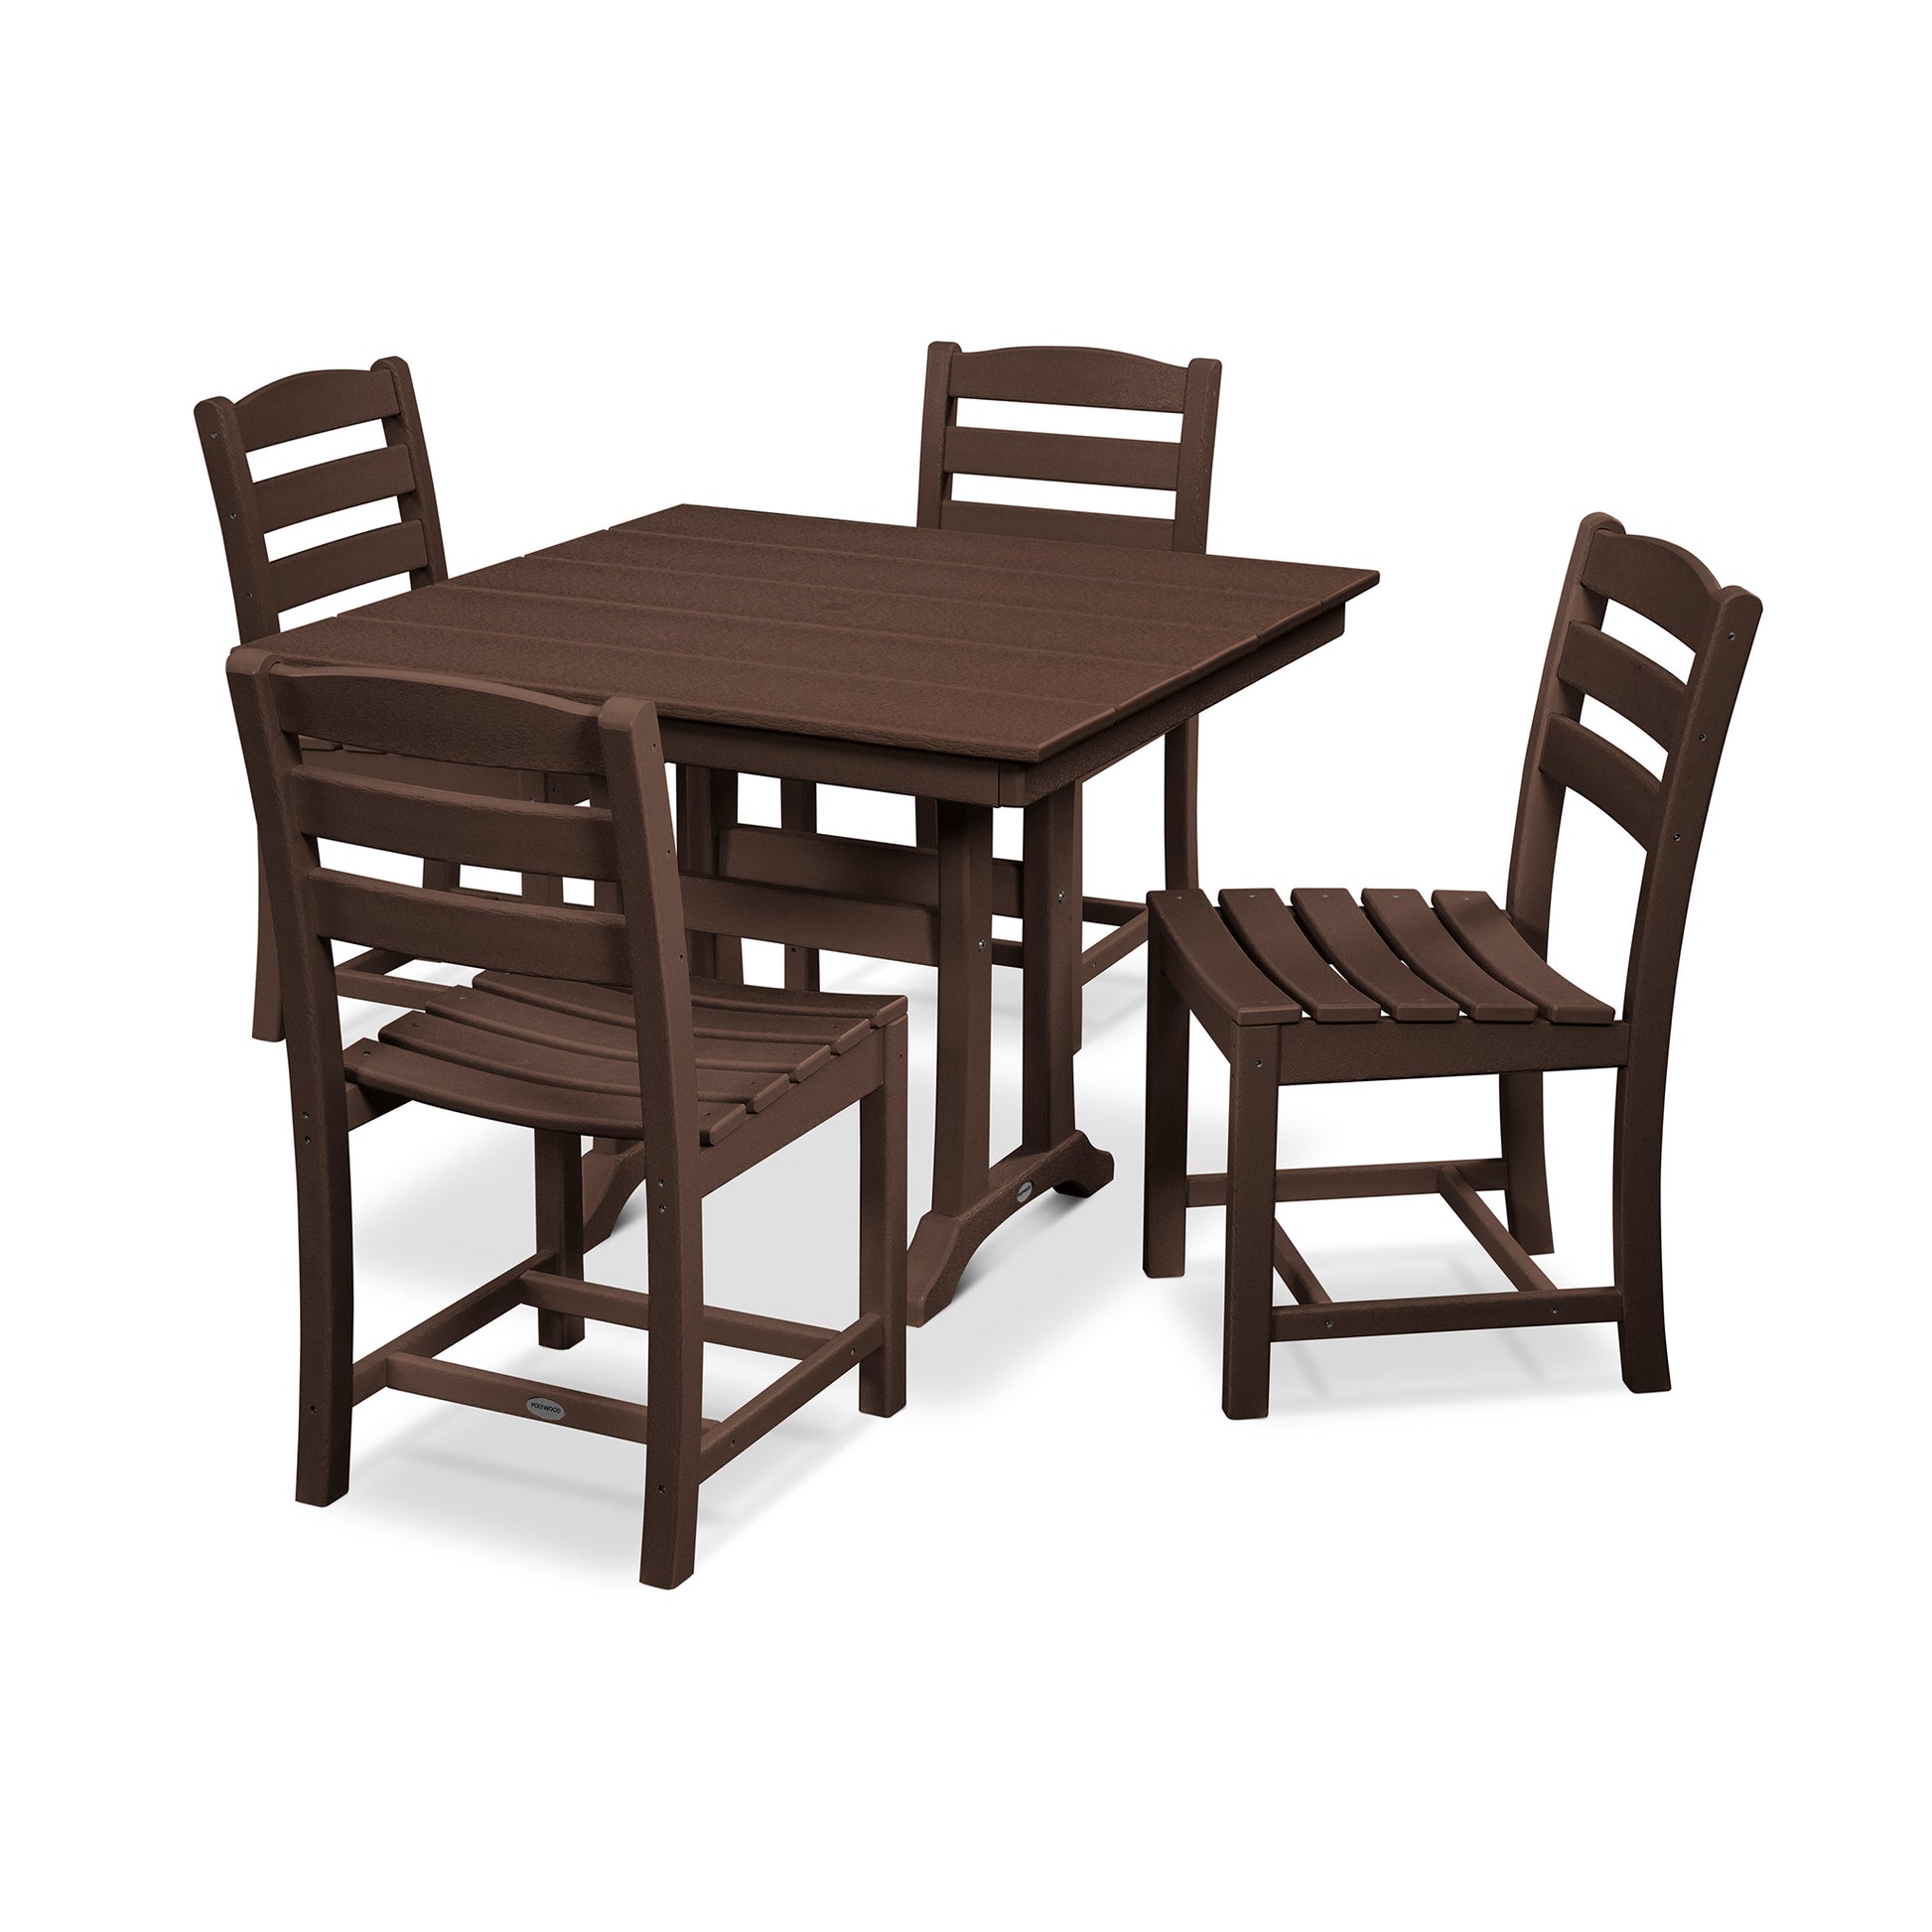 A modern dark brown POLYWOOD La Casa Café 5-Piece Farmhouse Trestle Side Chair Dining Set consisting of a square table and four chairs with slatted backs and seats, all on a white background.